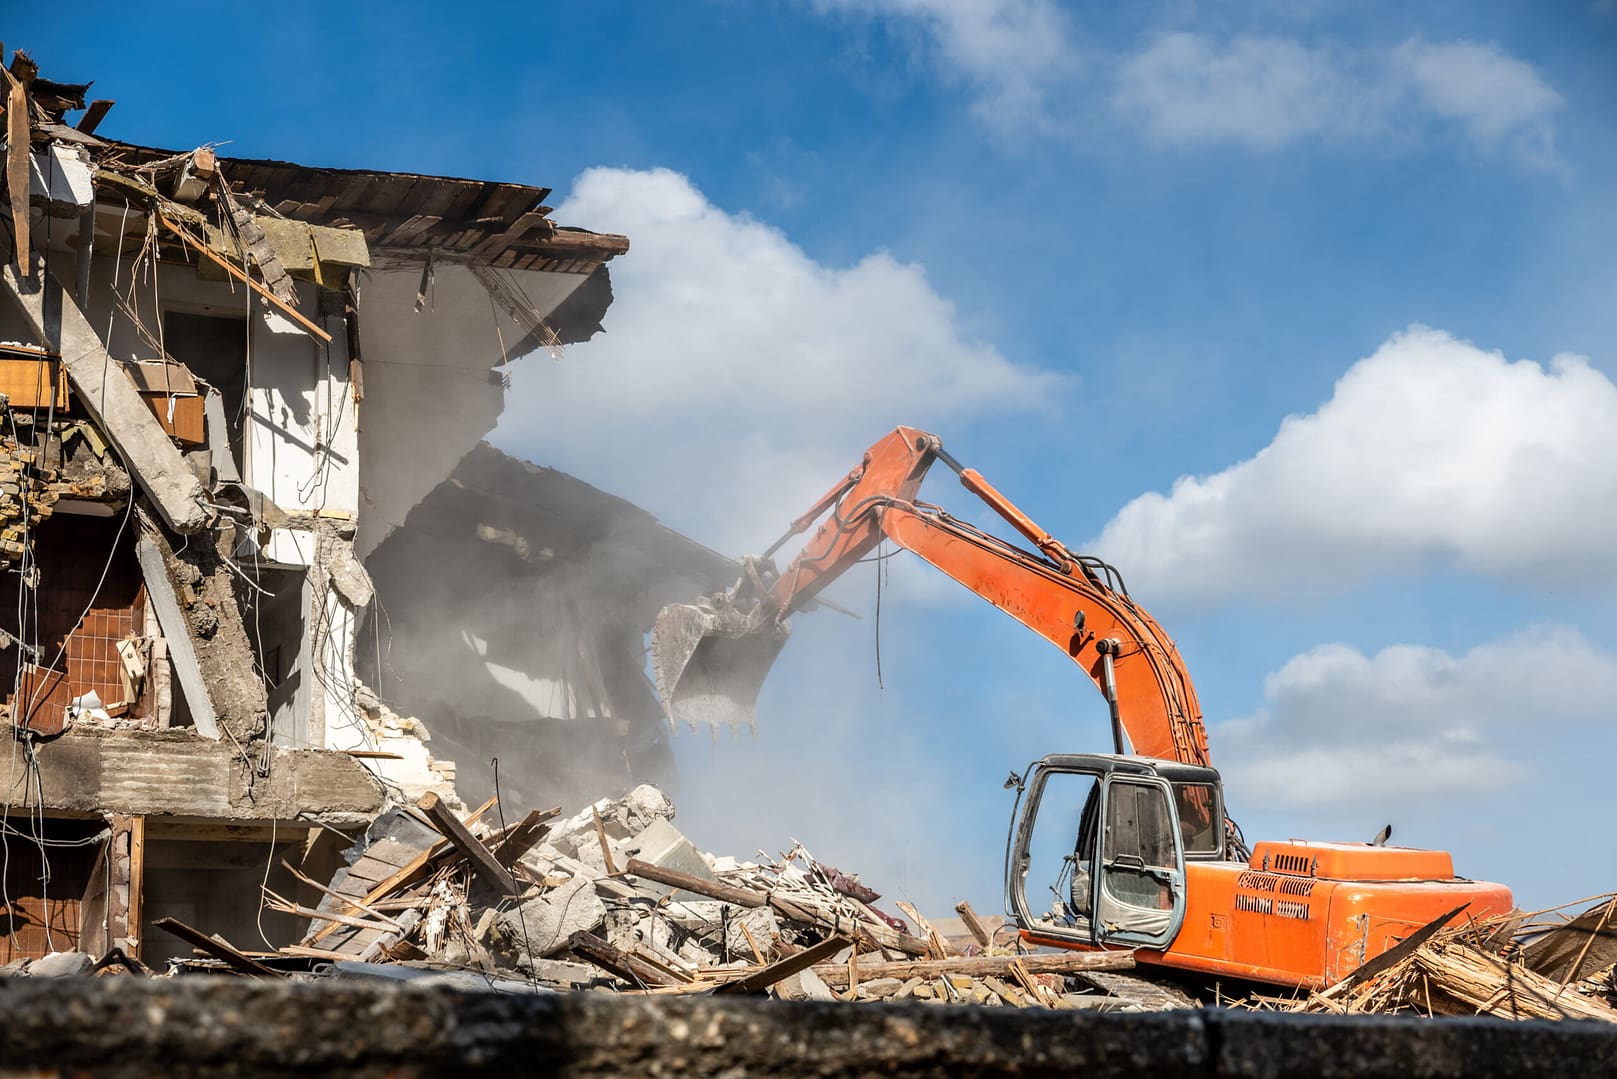 Backhoe actively engaged in a large-scale demolition, illustrating the diverse projects catered to by excavation marketing strategies.